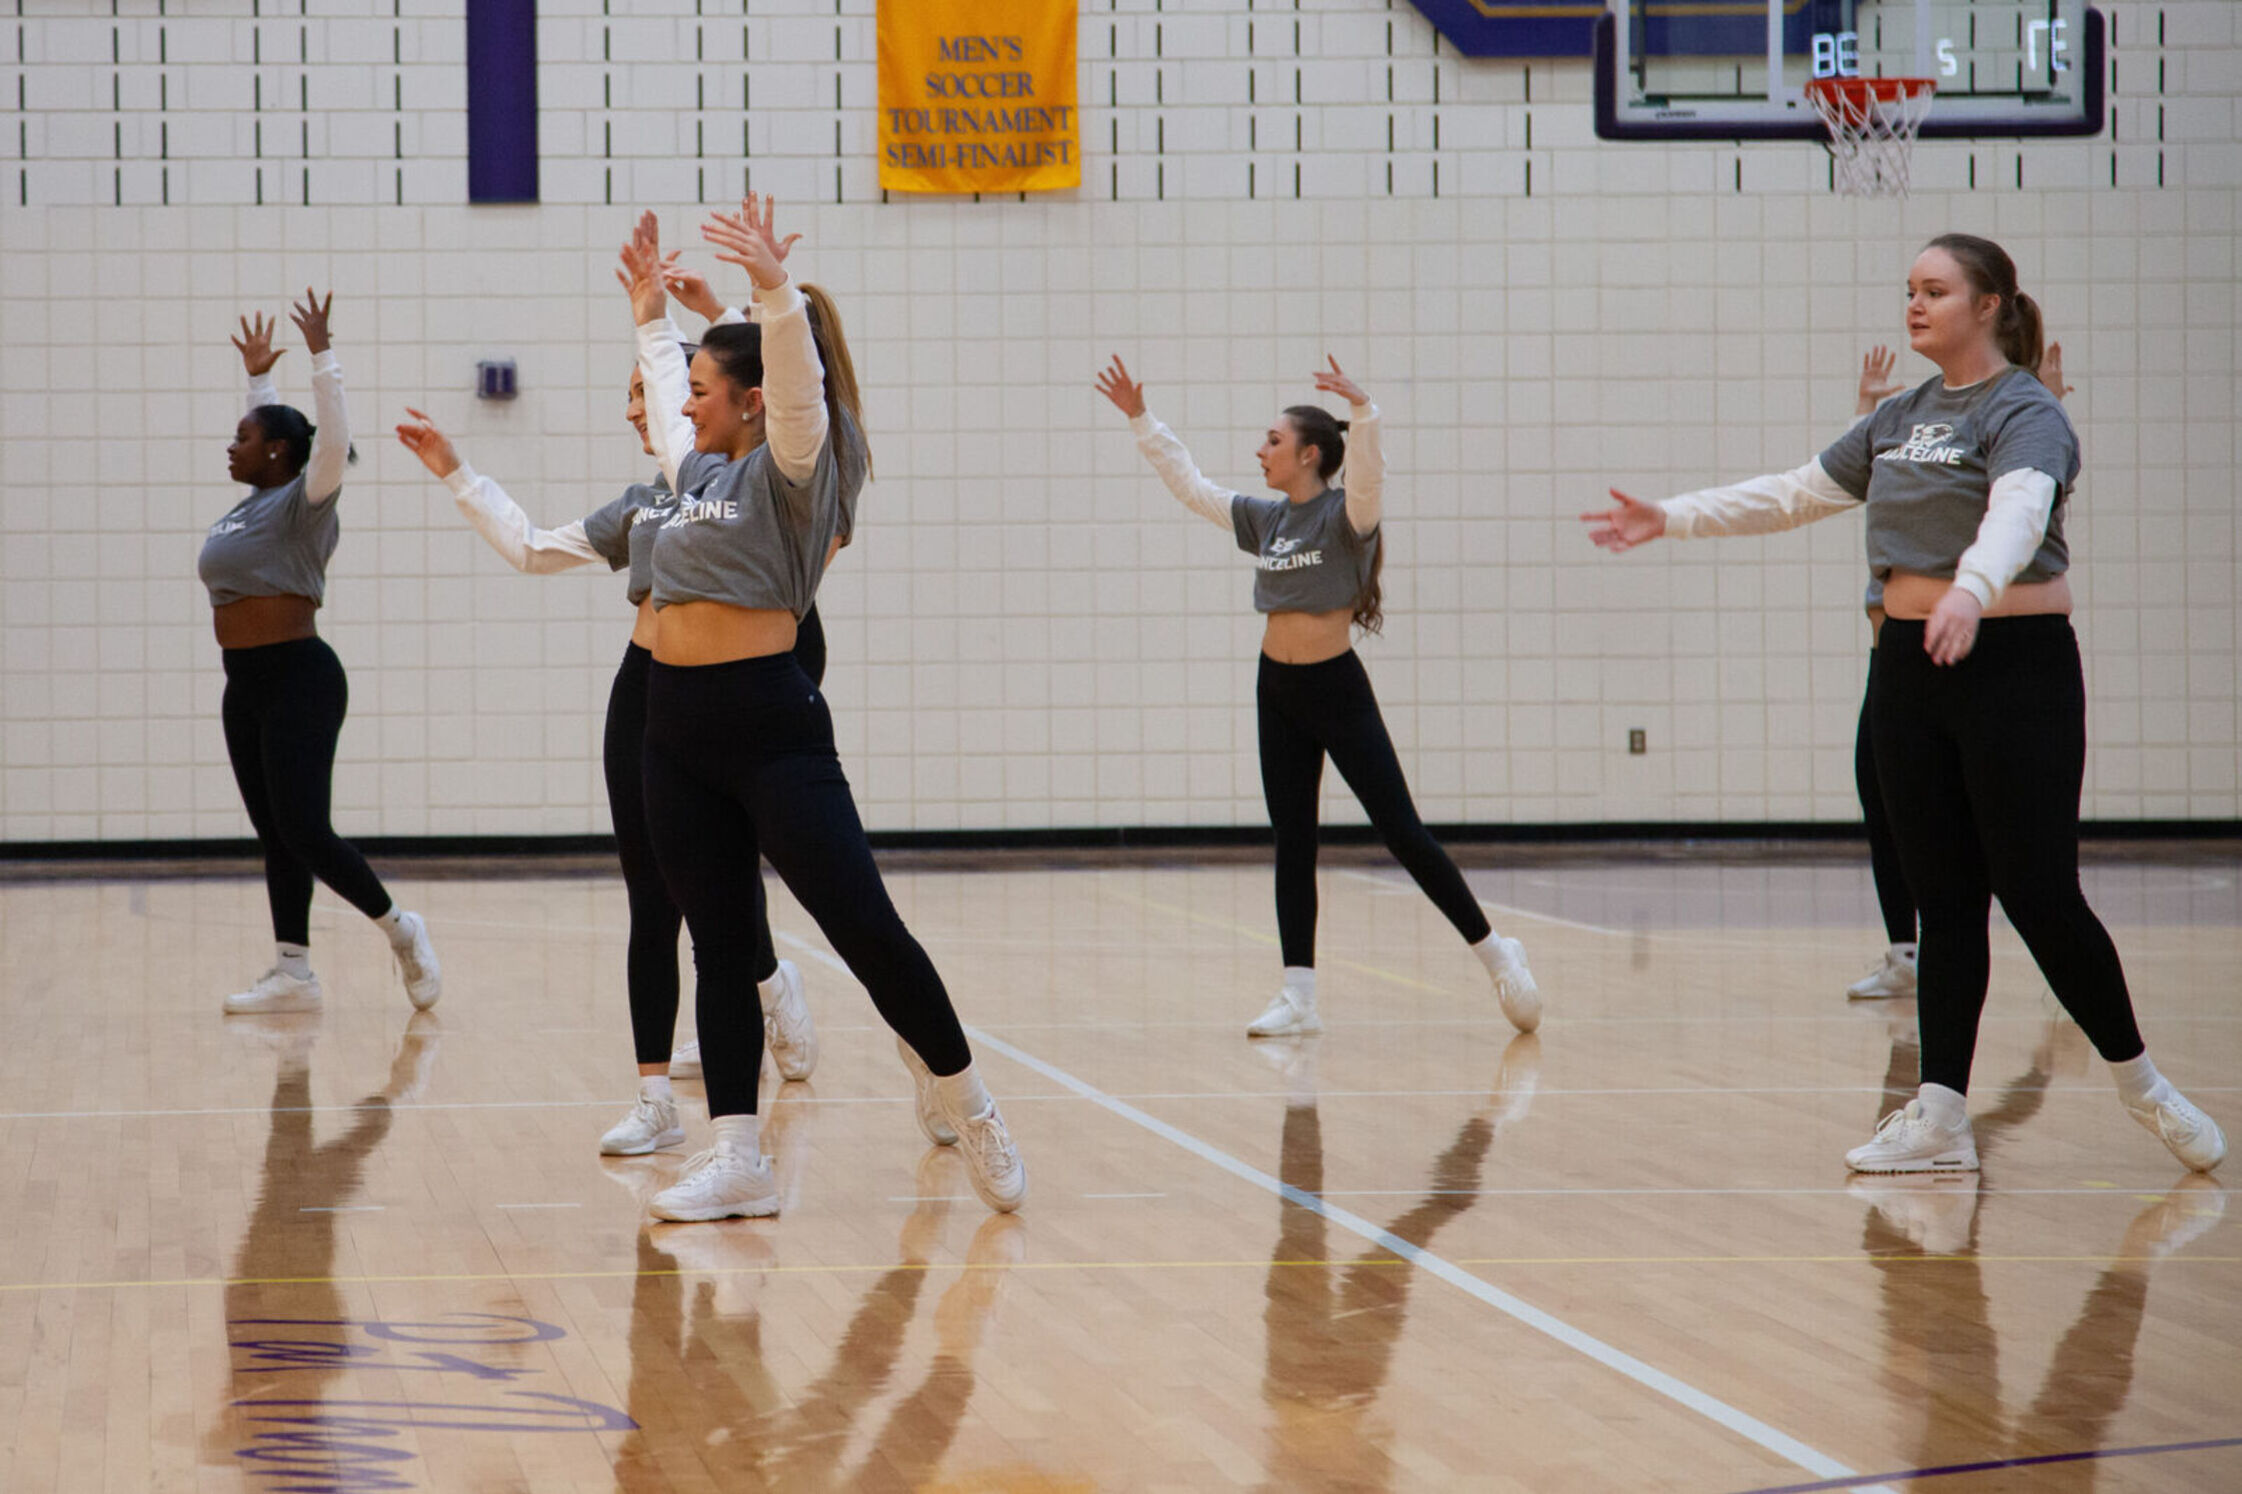 Danceline performs on the basketball court